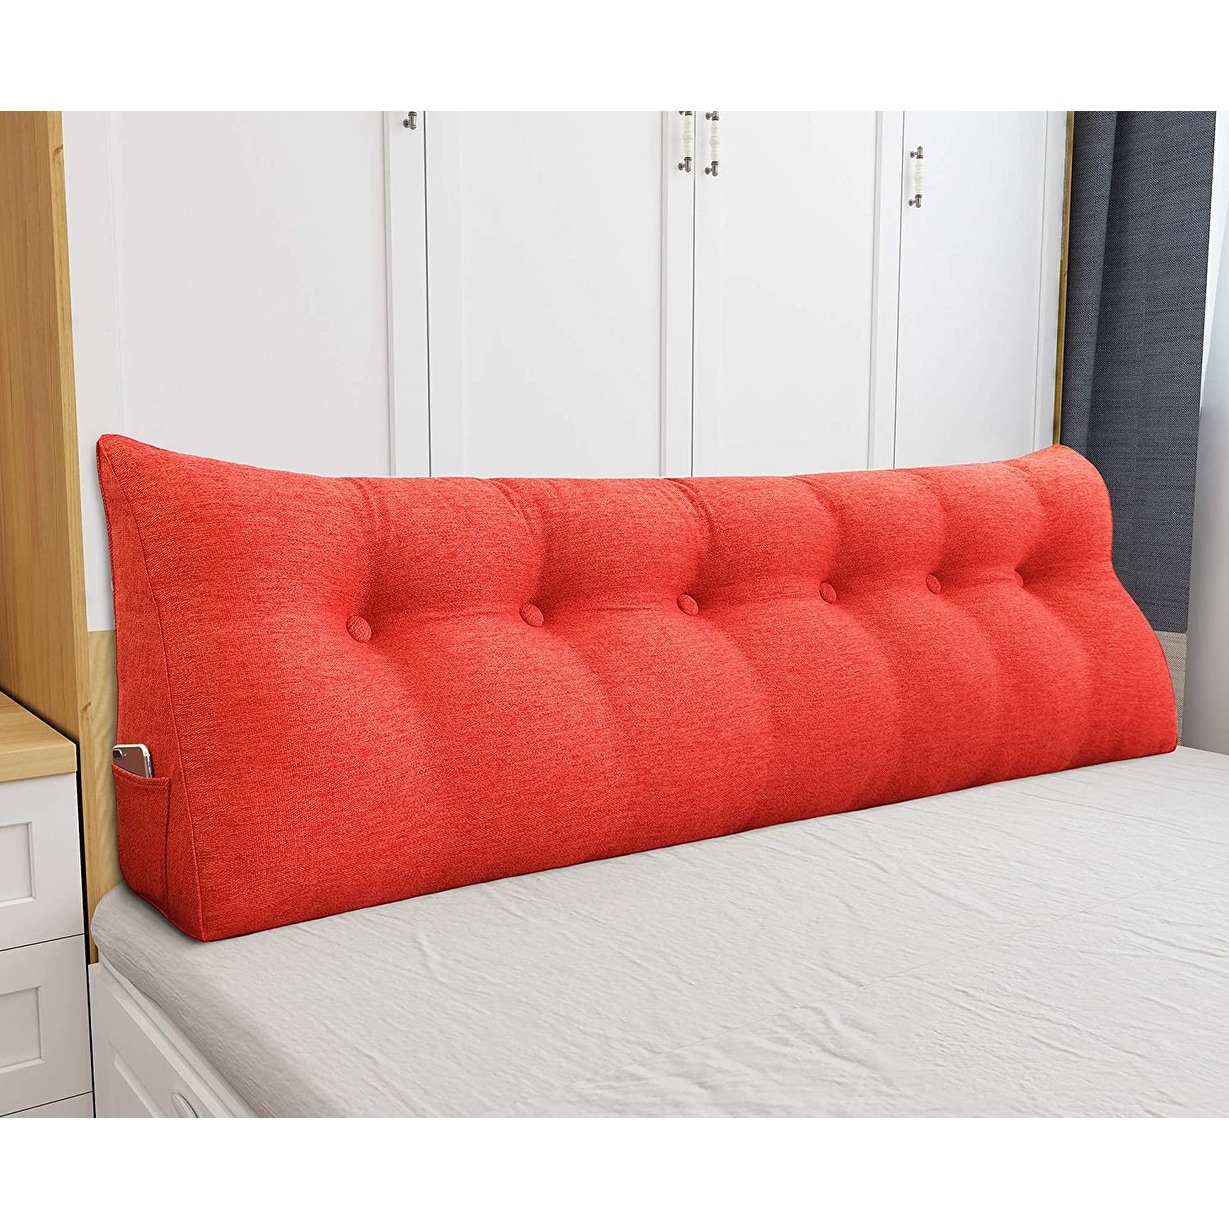 WOWMAX Bed Rest Wedge Pillow Headboard Reading Cushion TV Watching Support  - On Sale - Bed Bath & Beyond - 33890518